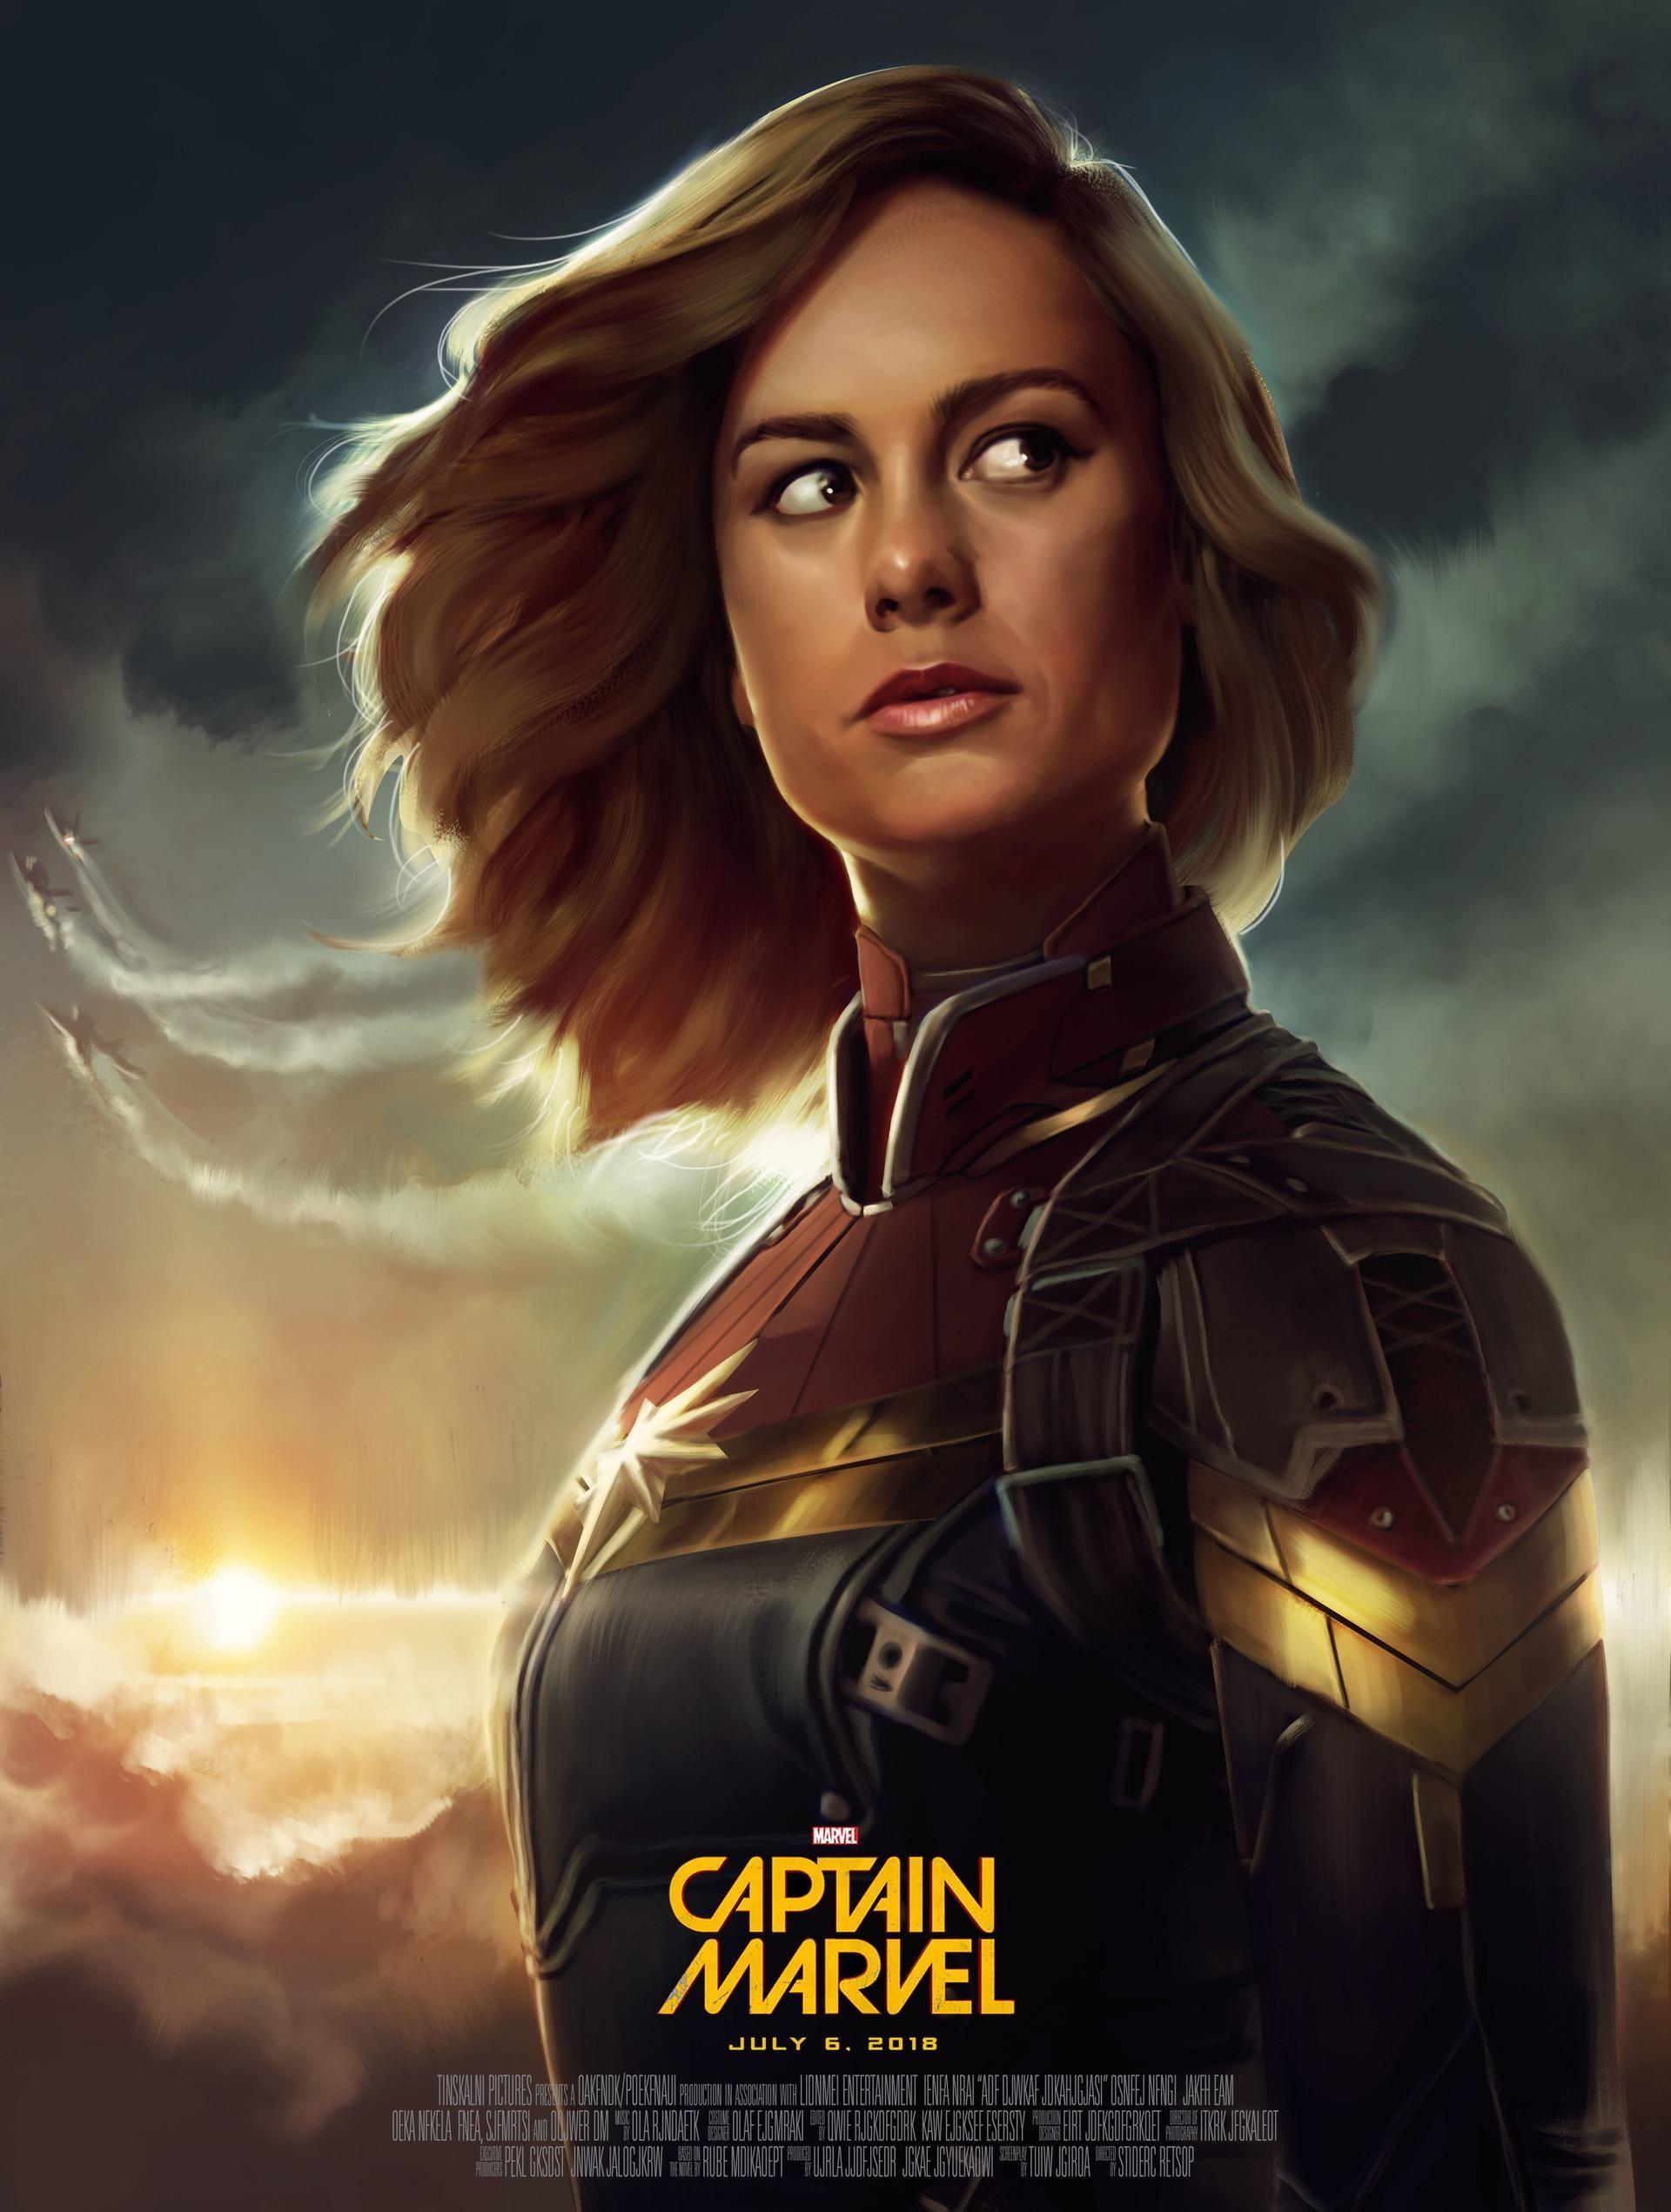 Captain Marvel (2019) HD Wallpaper From Gallsource.coms